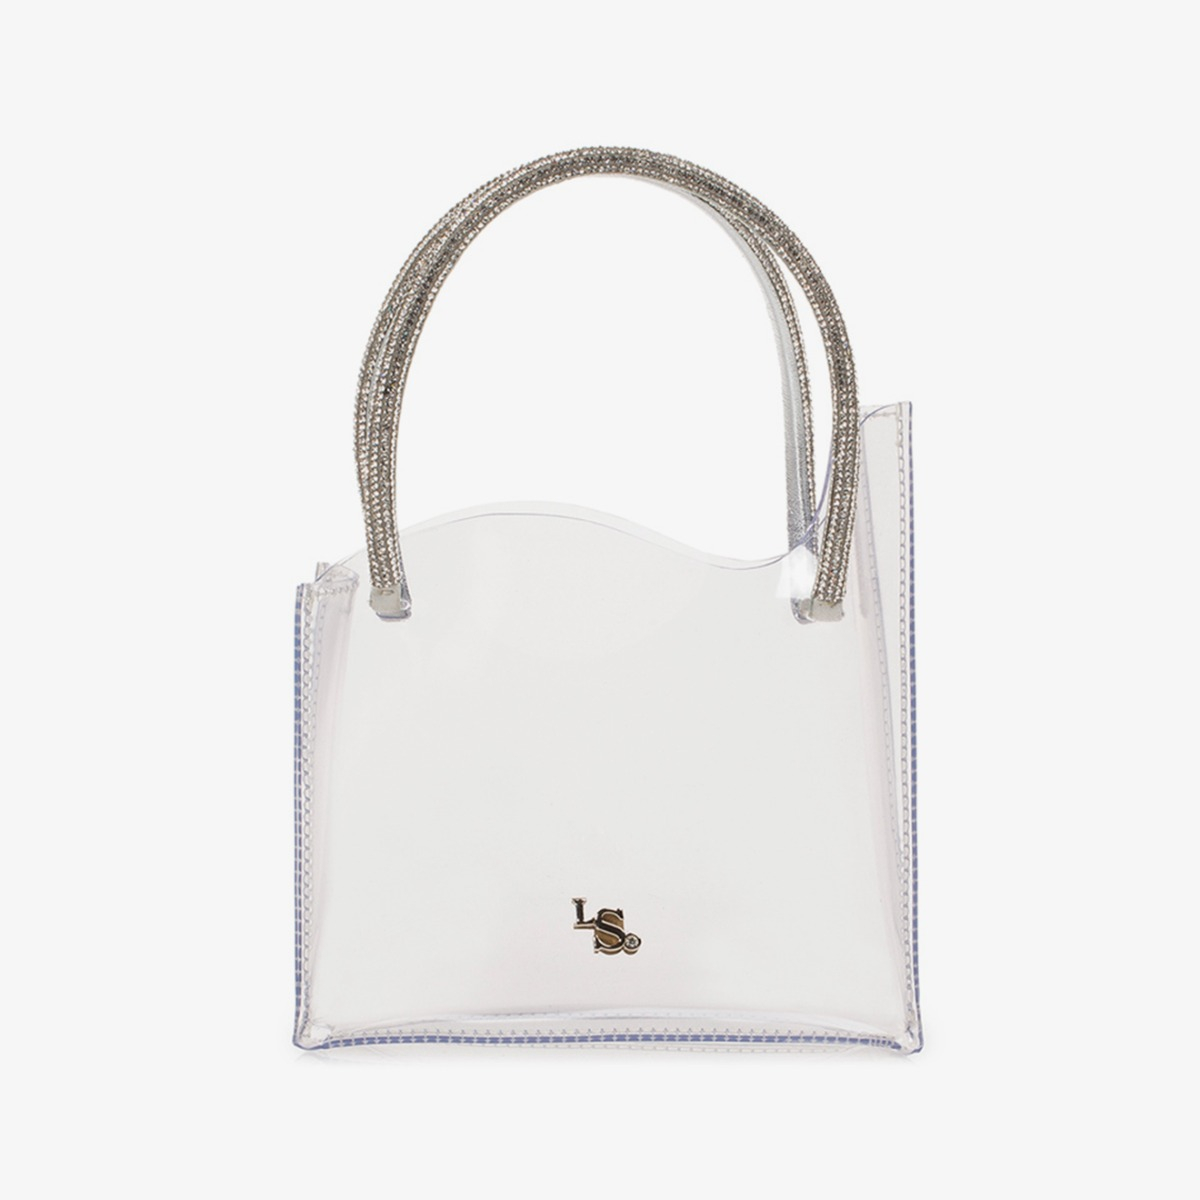 IVY MICRO BAG - Le Silla official outlet